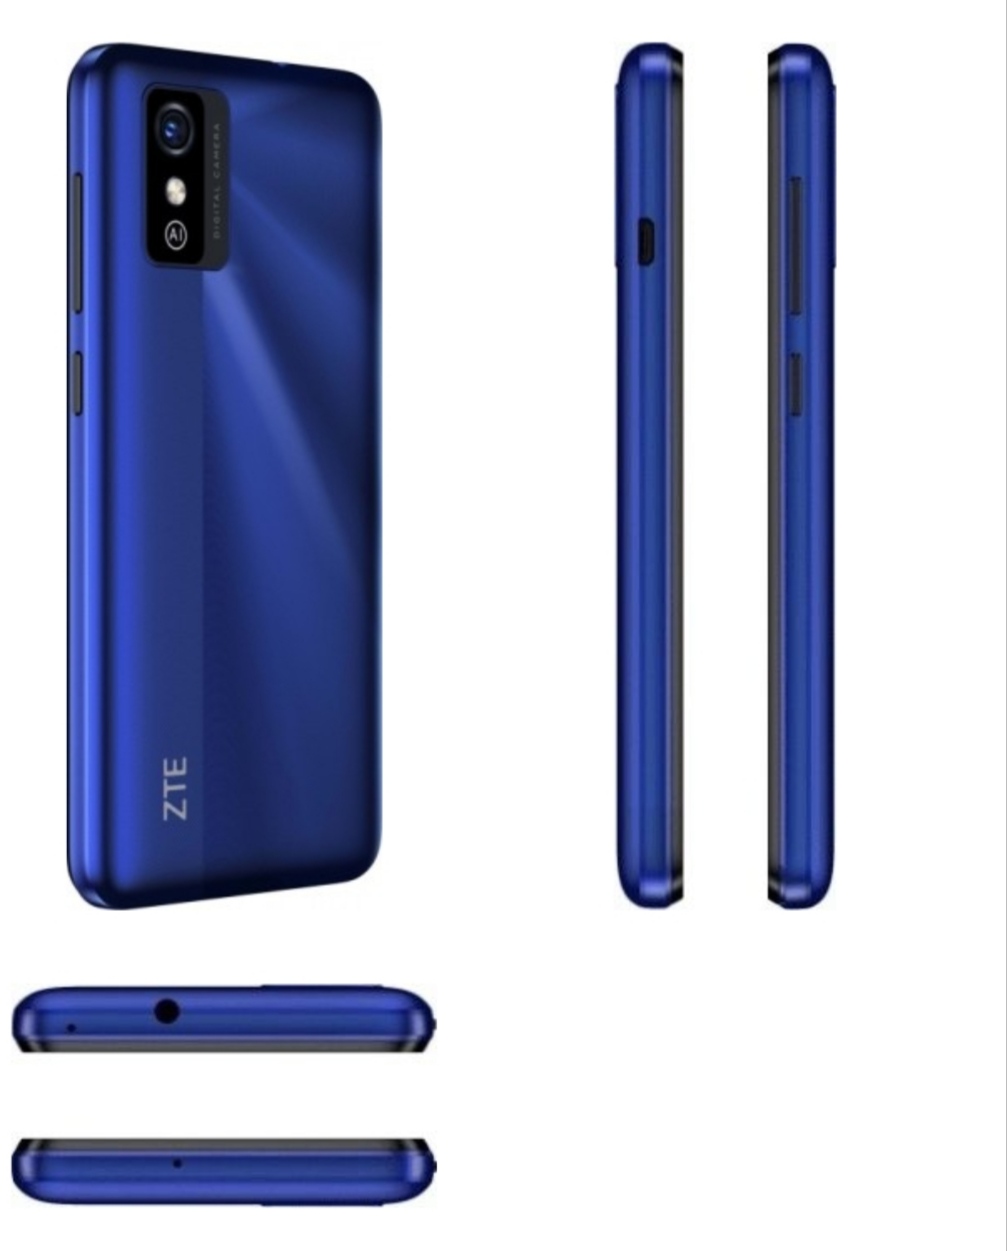 ZTE Blade L9 Smartphone | See Specs and Features | DroidAfrica